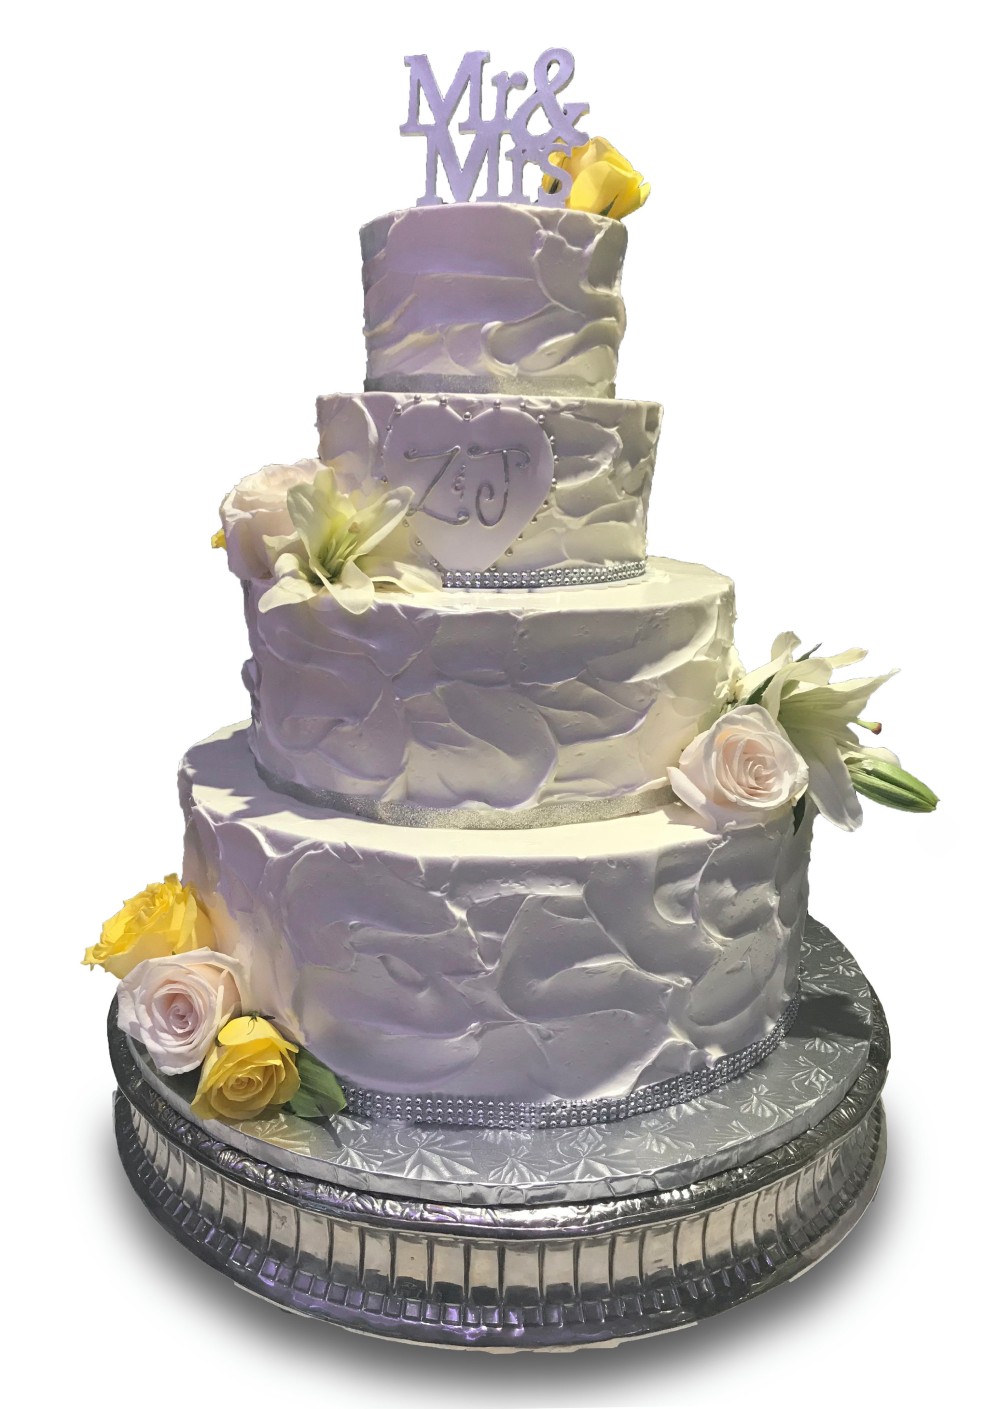 Homestyle wedding cake with live flowers 